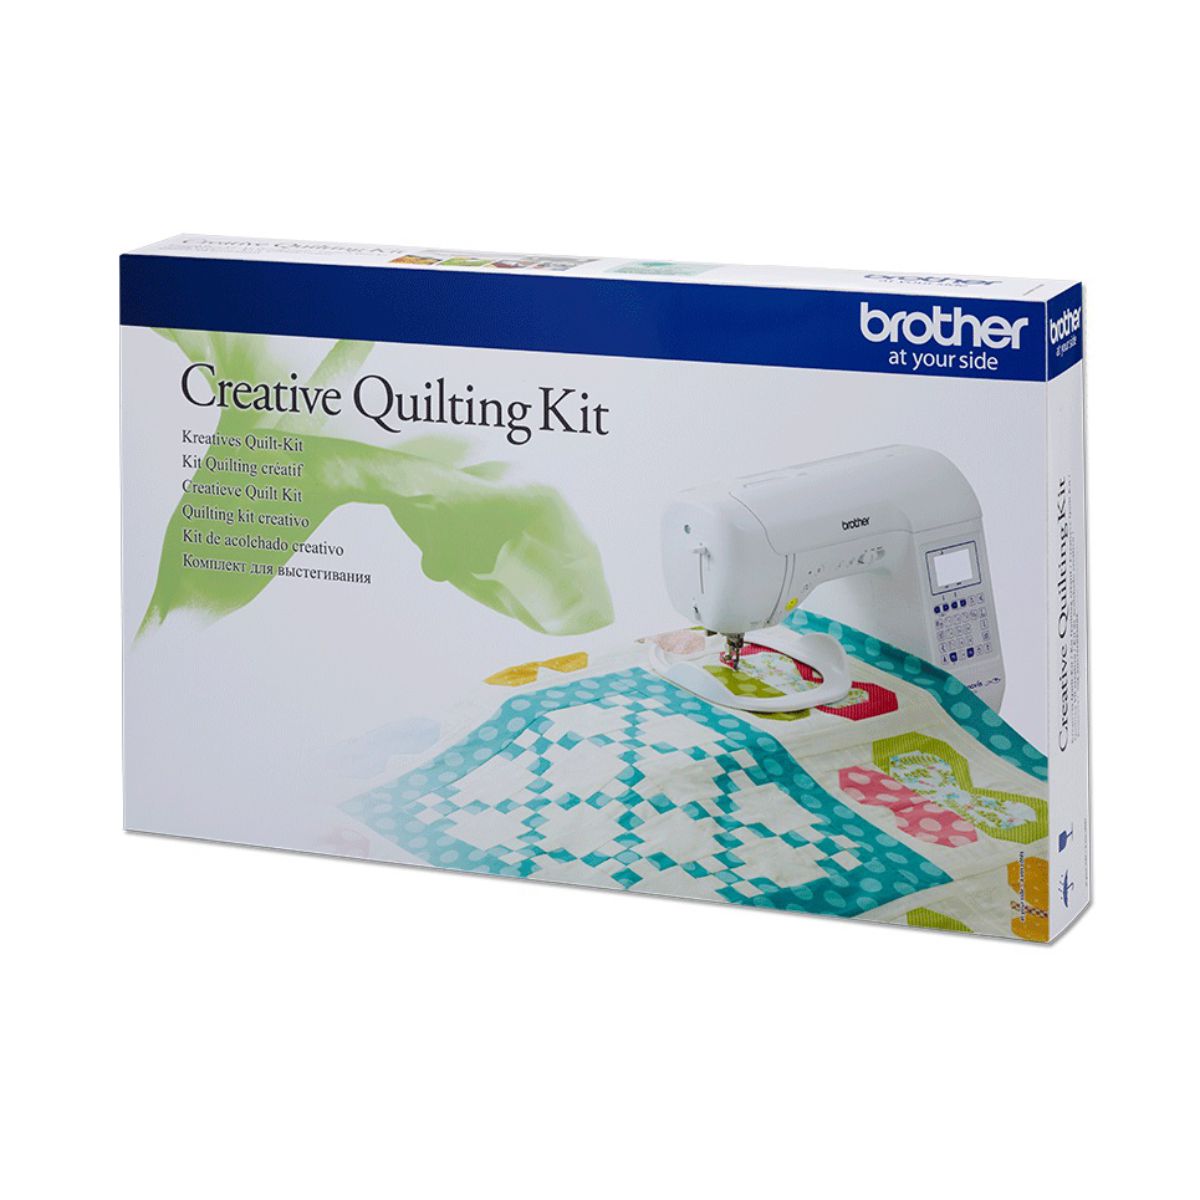 Brother QKF3 Creative Quilting Kit